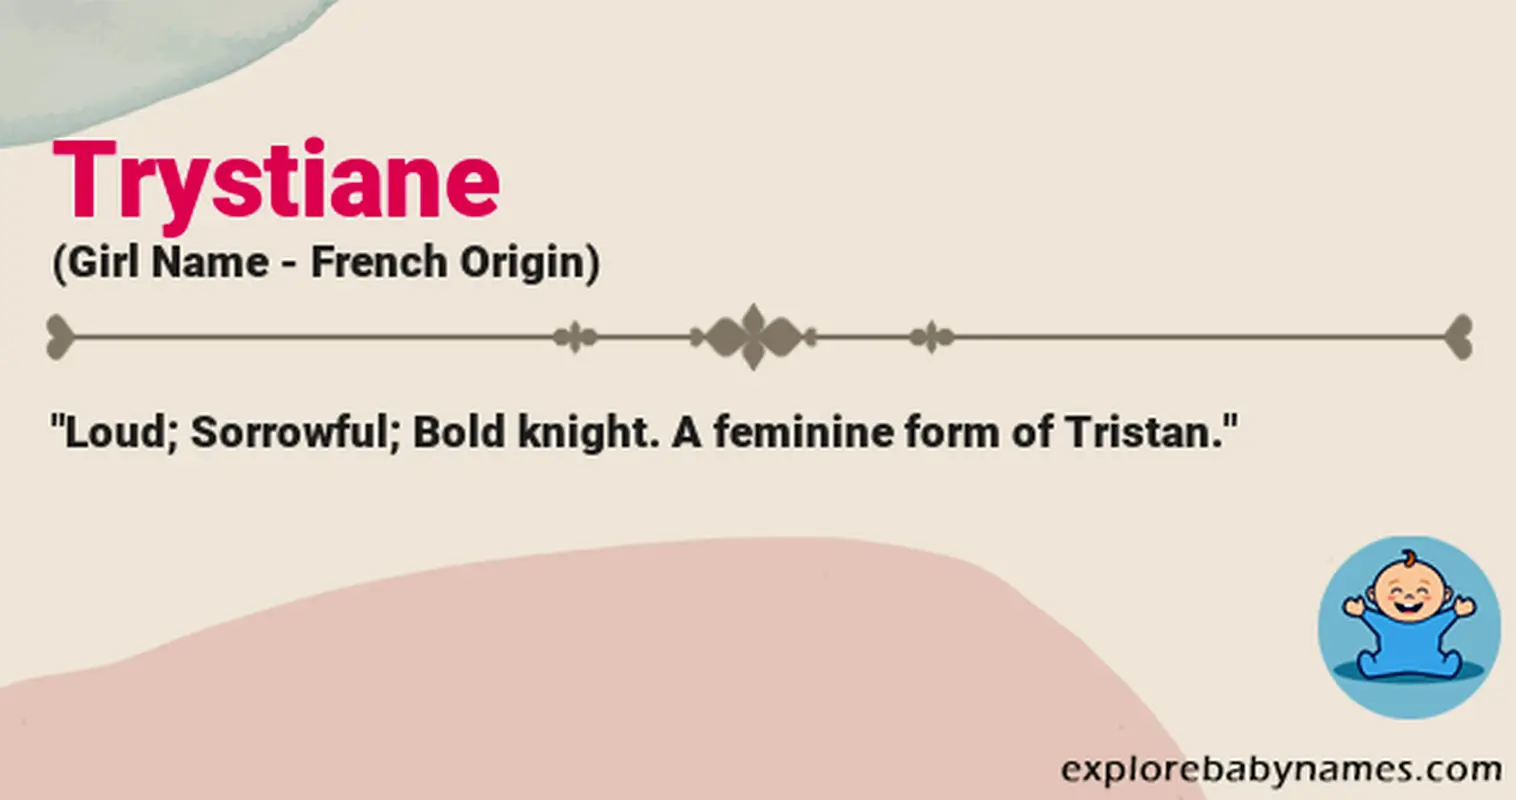 Meaning of Trystiane